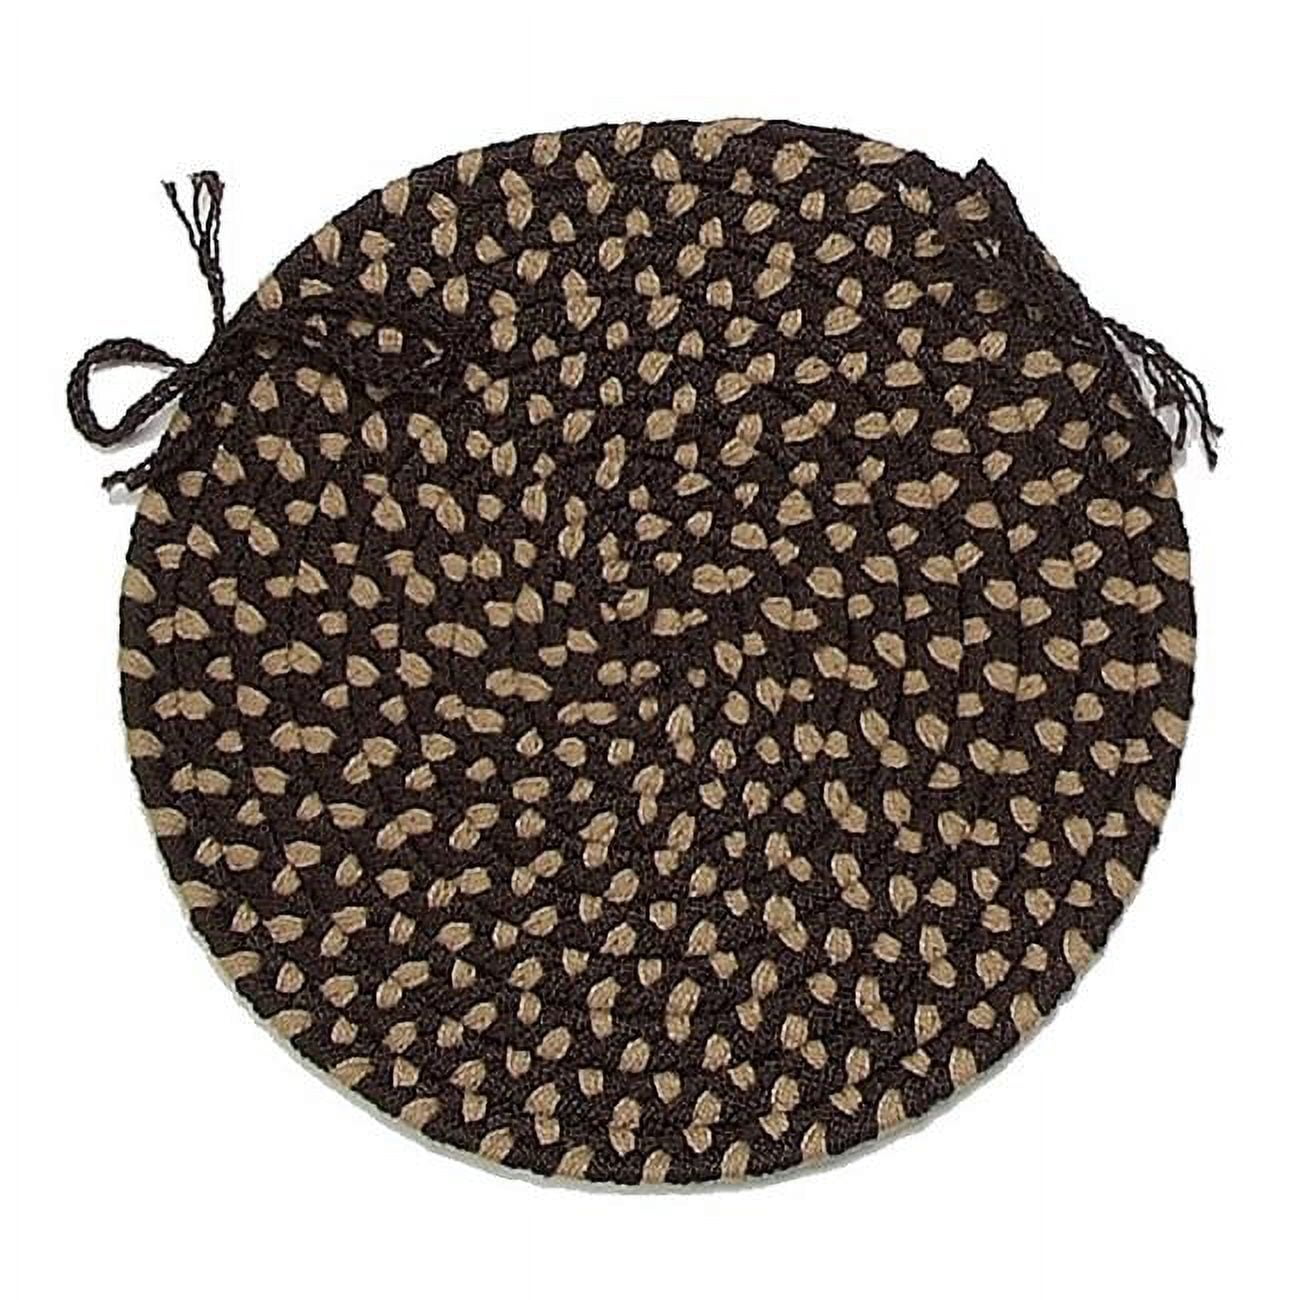 Bf72r132x132 11 Ft. Brook Farm Round Area Rug, Natural Earth